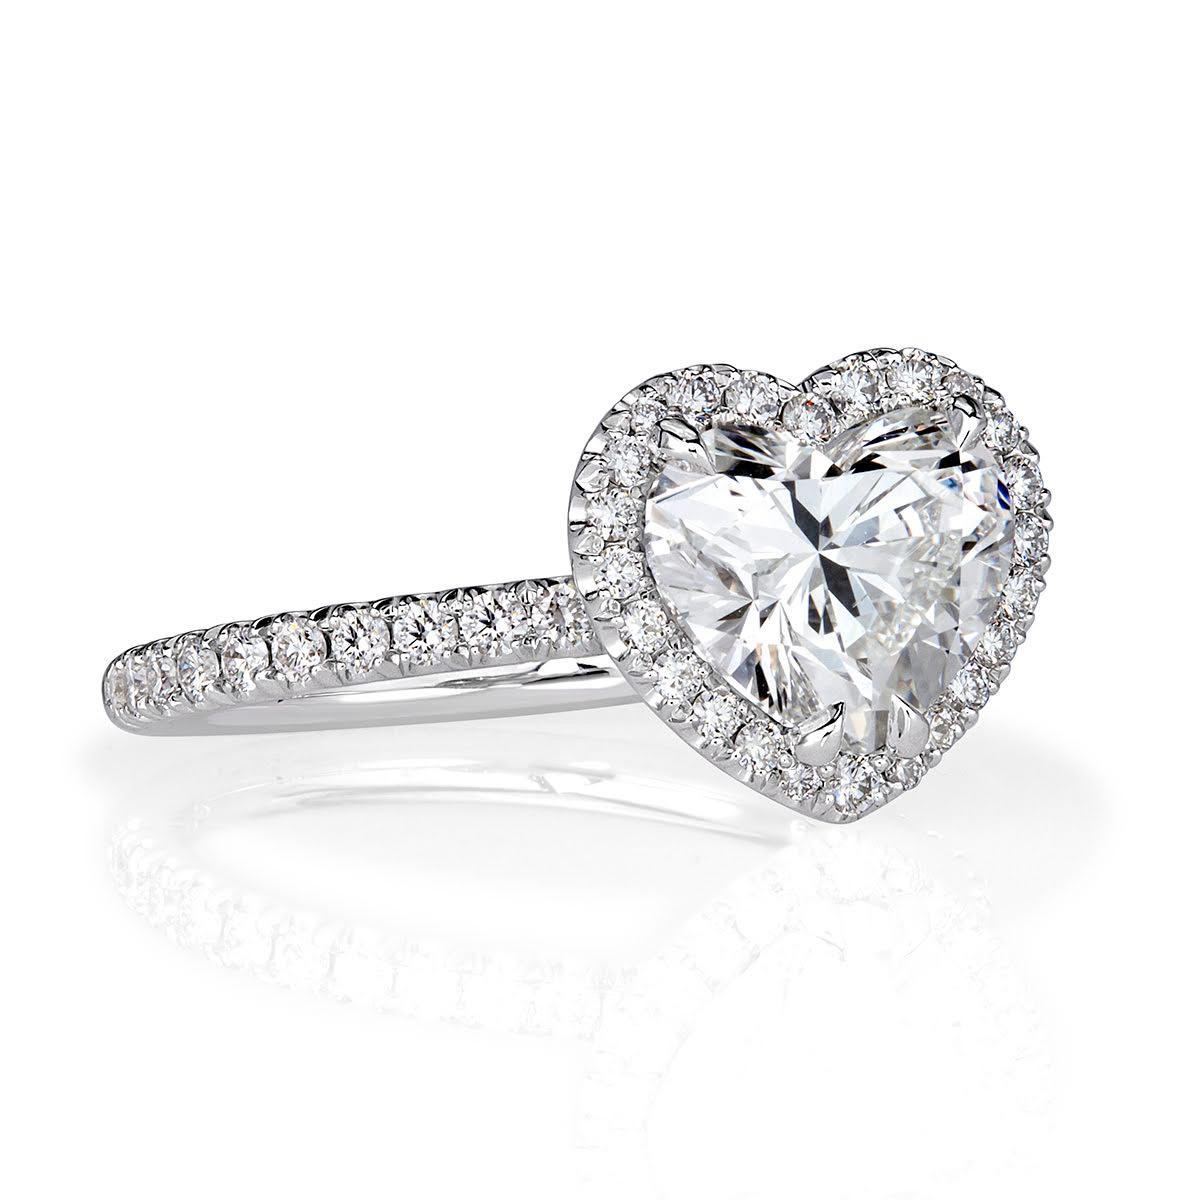 This exquisite diamond engagement ring showcases a 2.00ct heart shaped center diamond, GIA certified at H-VS2. It is accented by a matching halo of round brilliant cut diamonds as well as one row of sparkling diamonds micro pavé set down the band.